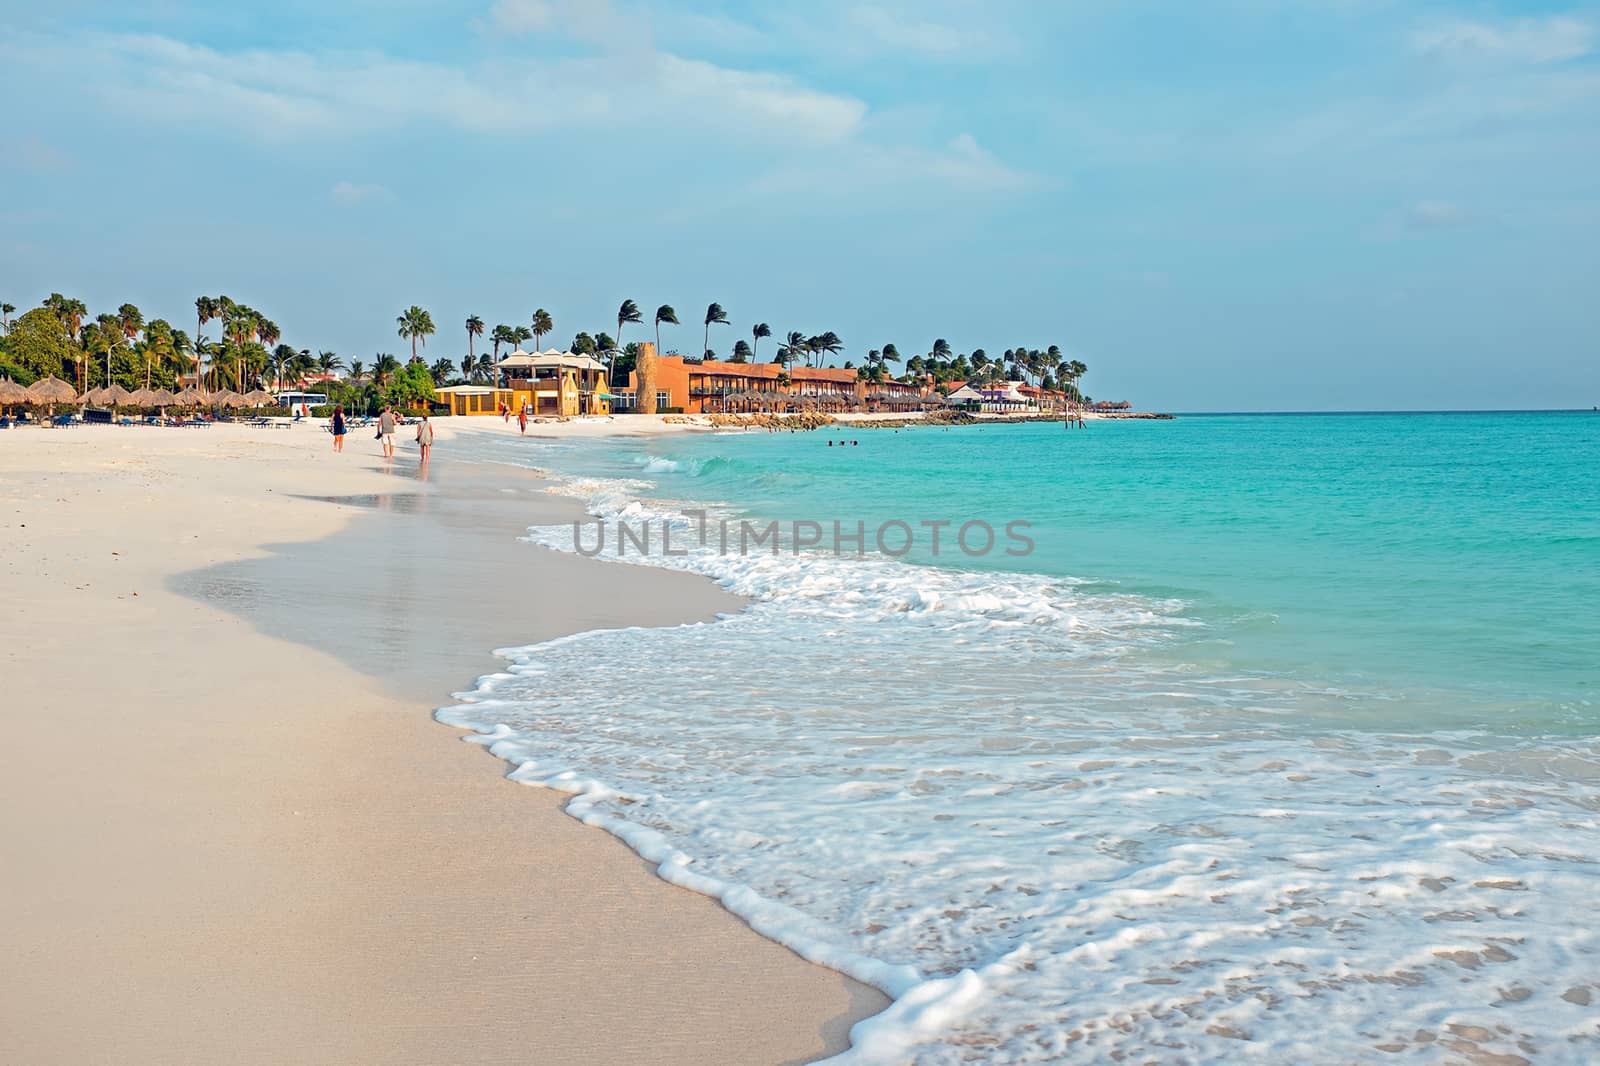 View on Manchebo beach on Aruba in the Caribbean Sea by devy